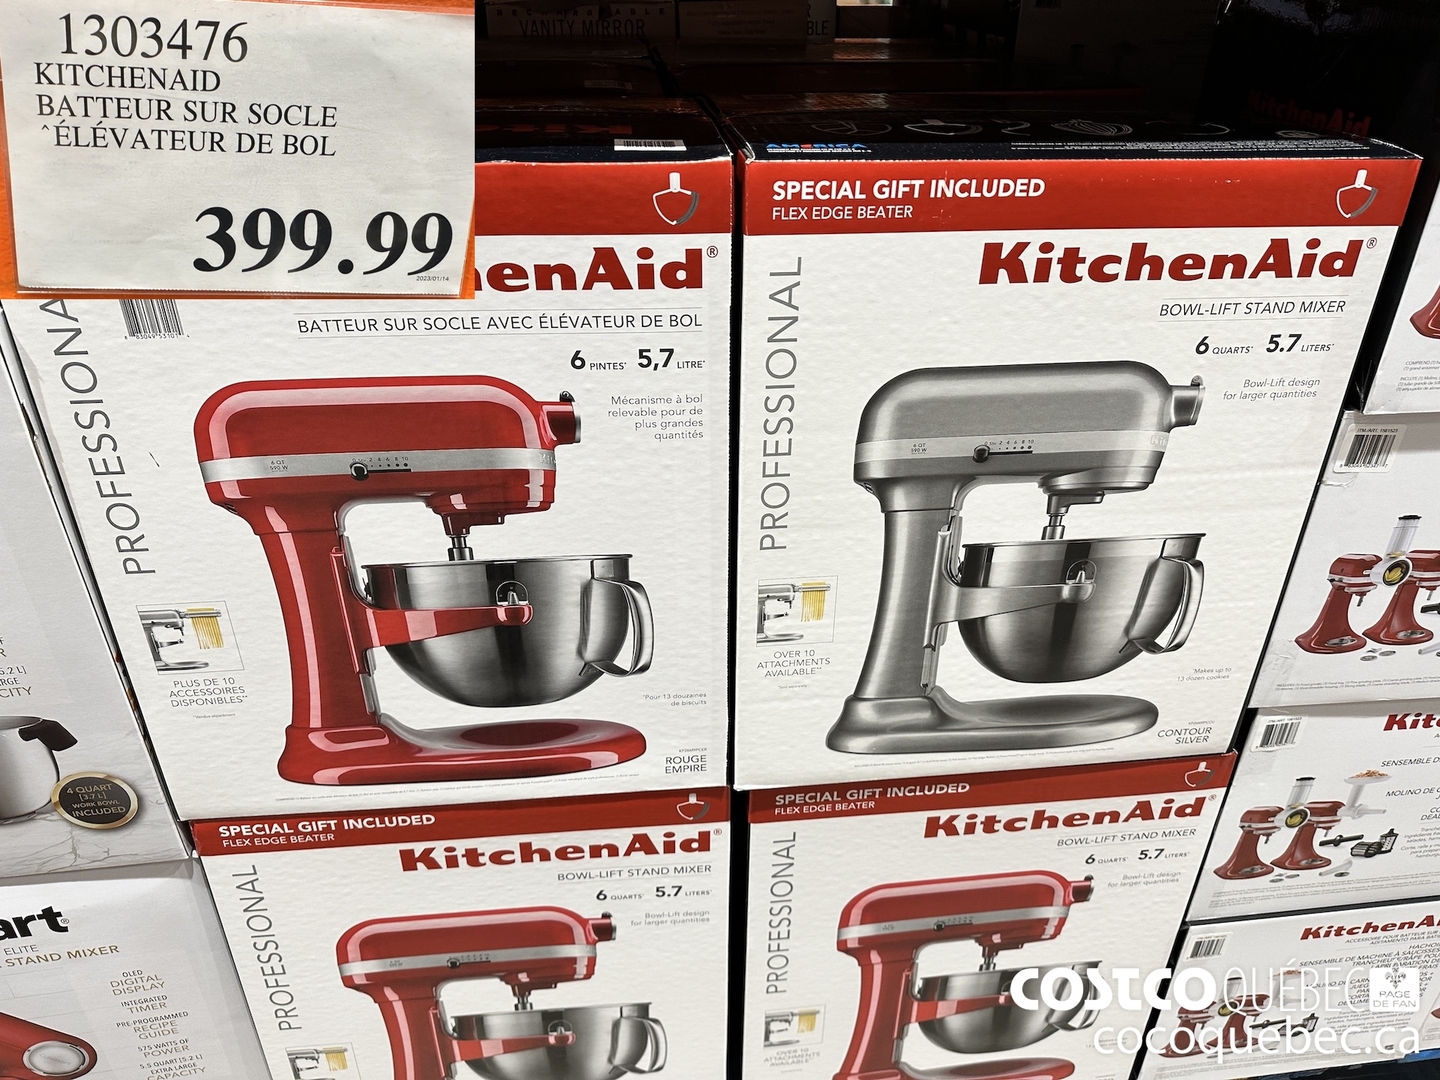 Great .97 deal on a KitchenAid Mixer : r/Costco